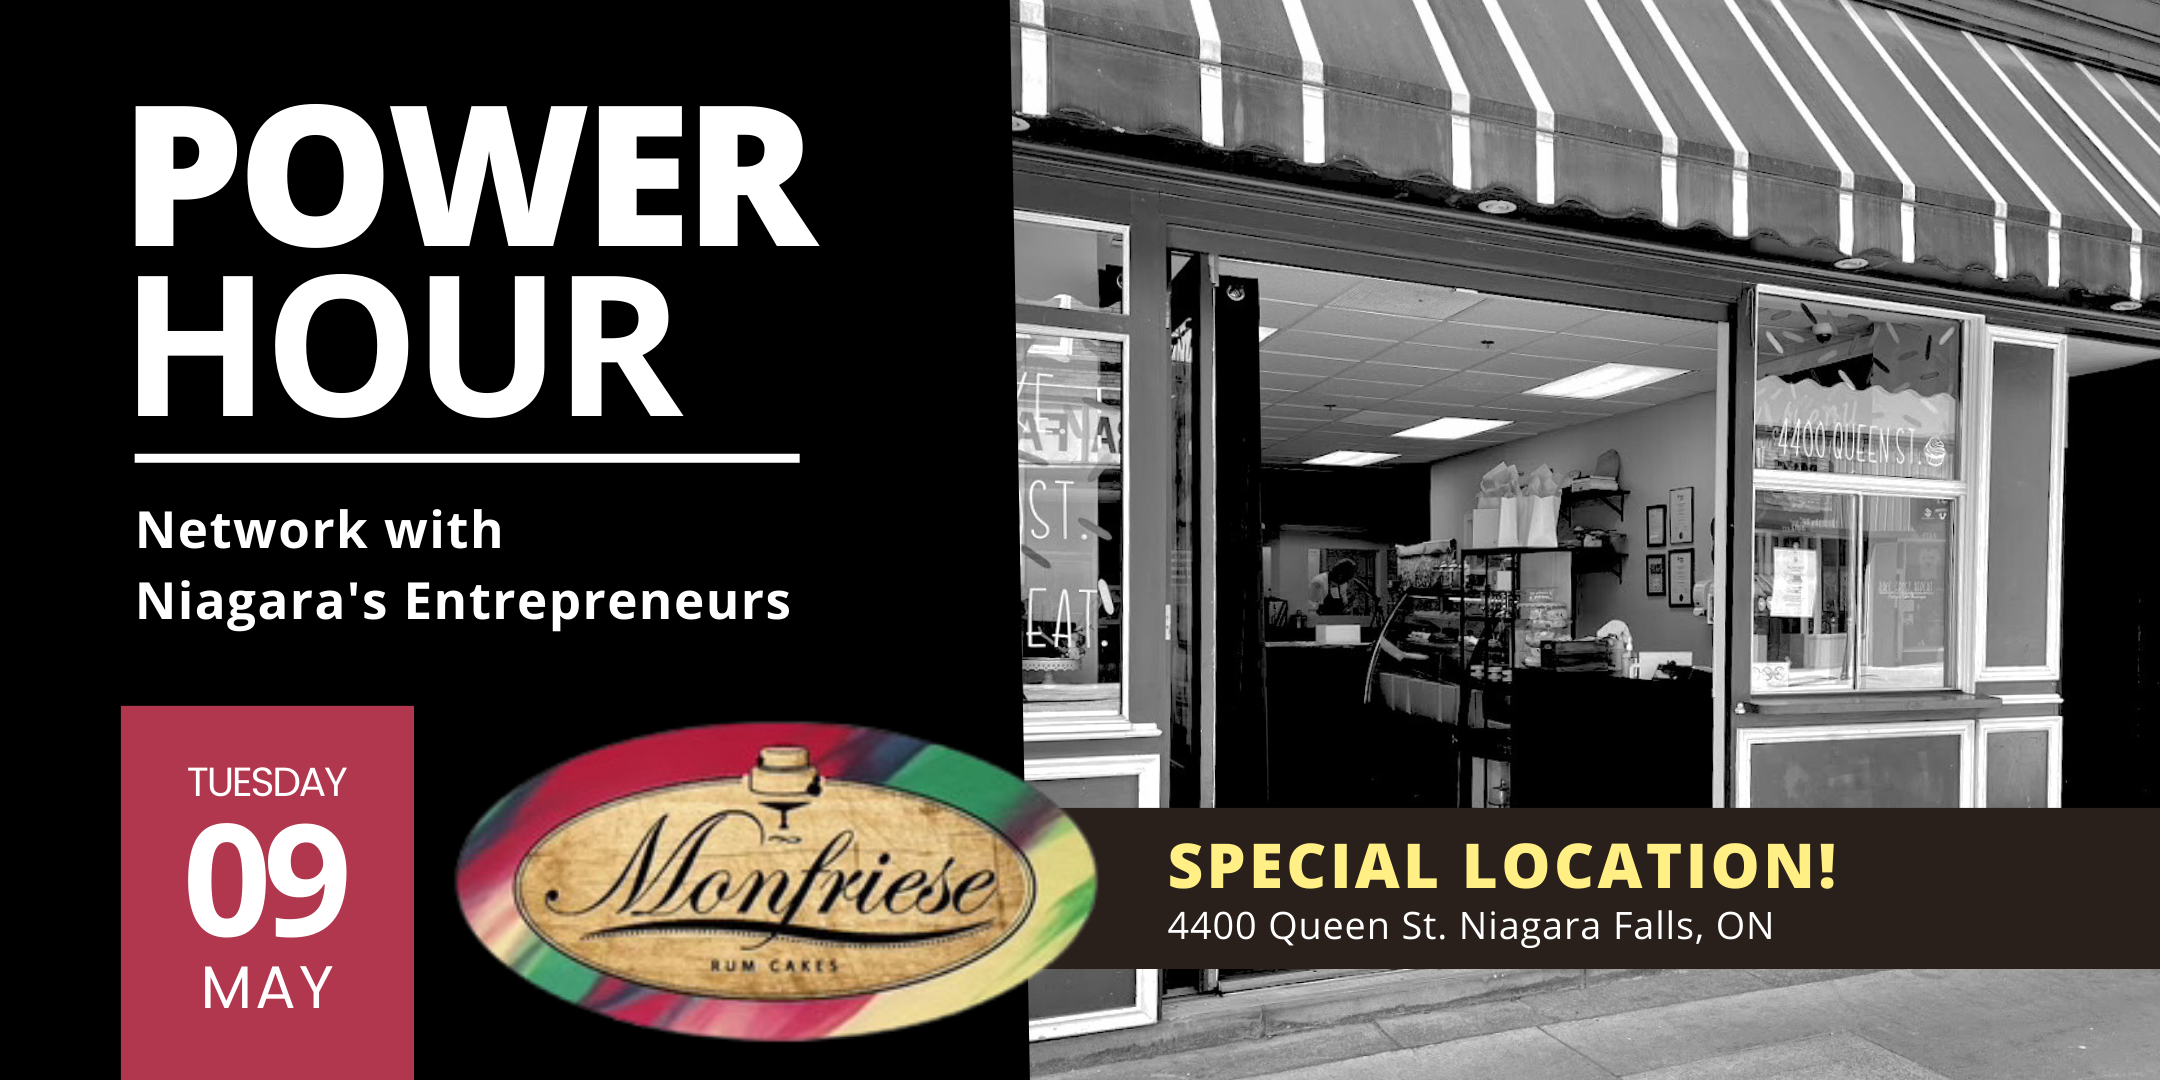 Power Hour. Network with Niagara's Entrepreneurs. Tuesday 9 May. Special Location Monfriese 4400 Queen St. Niagara Falls, ON.